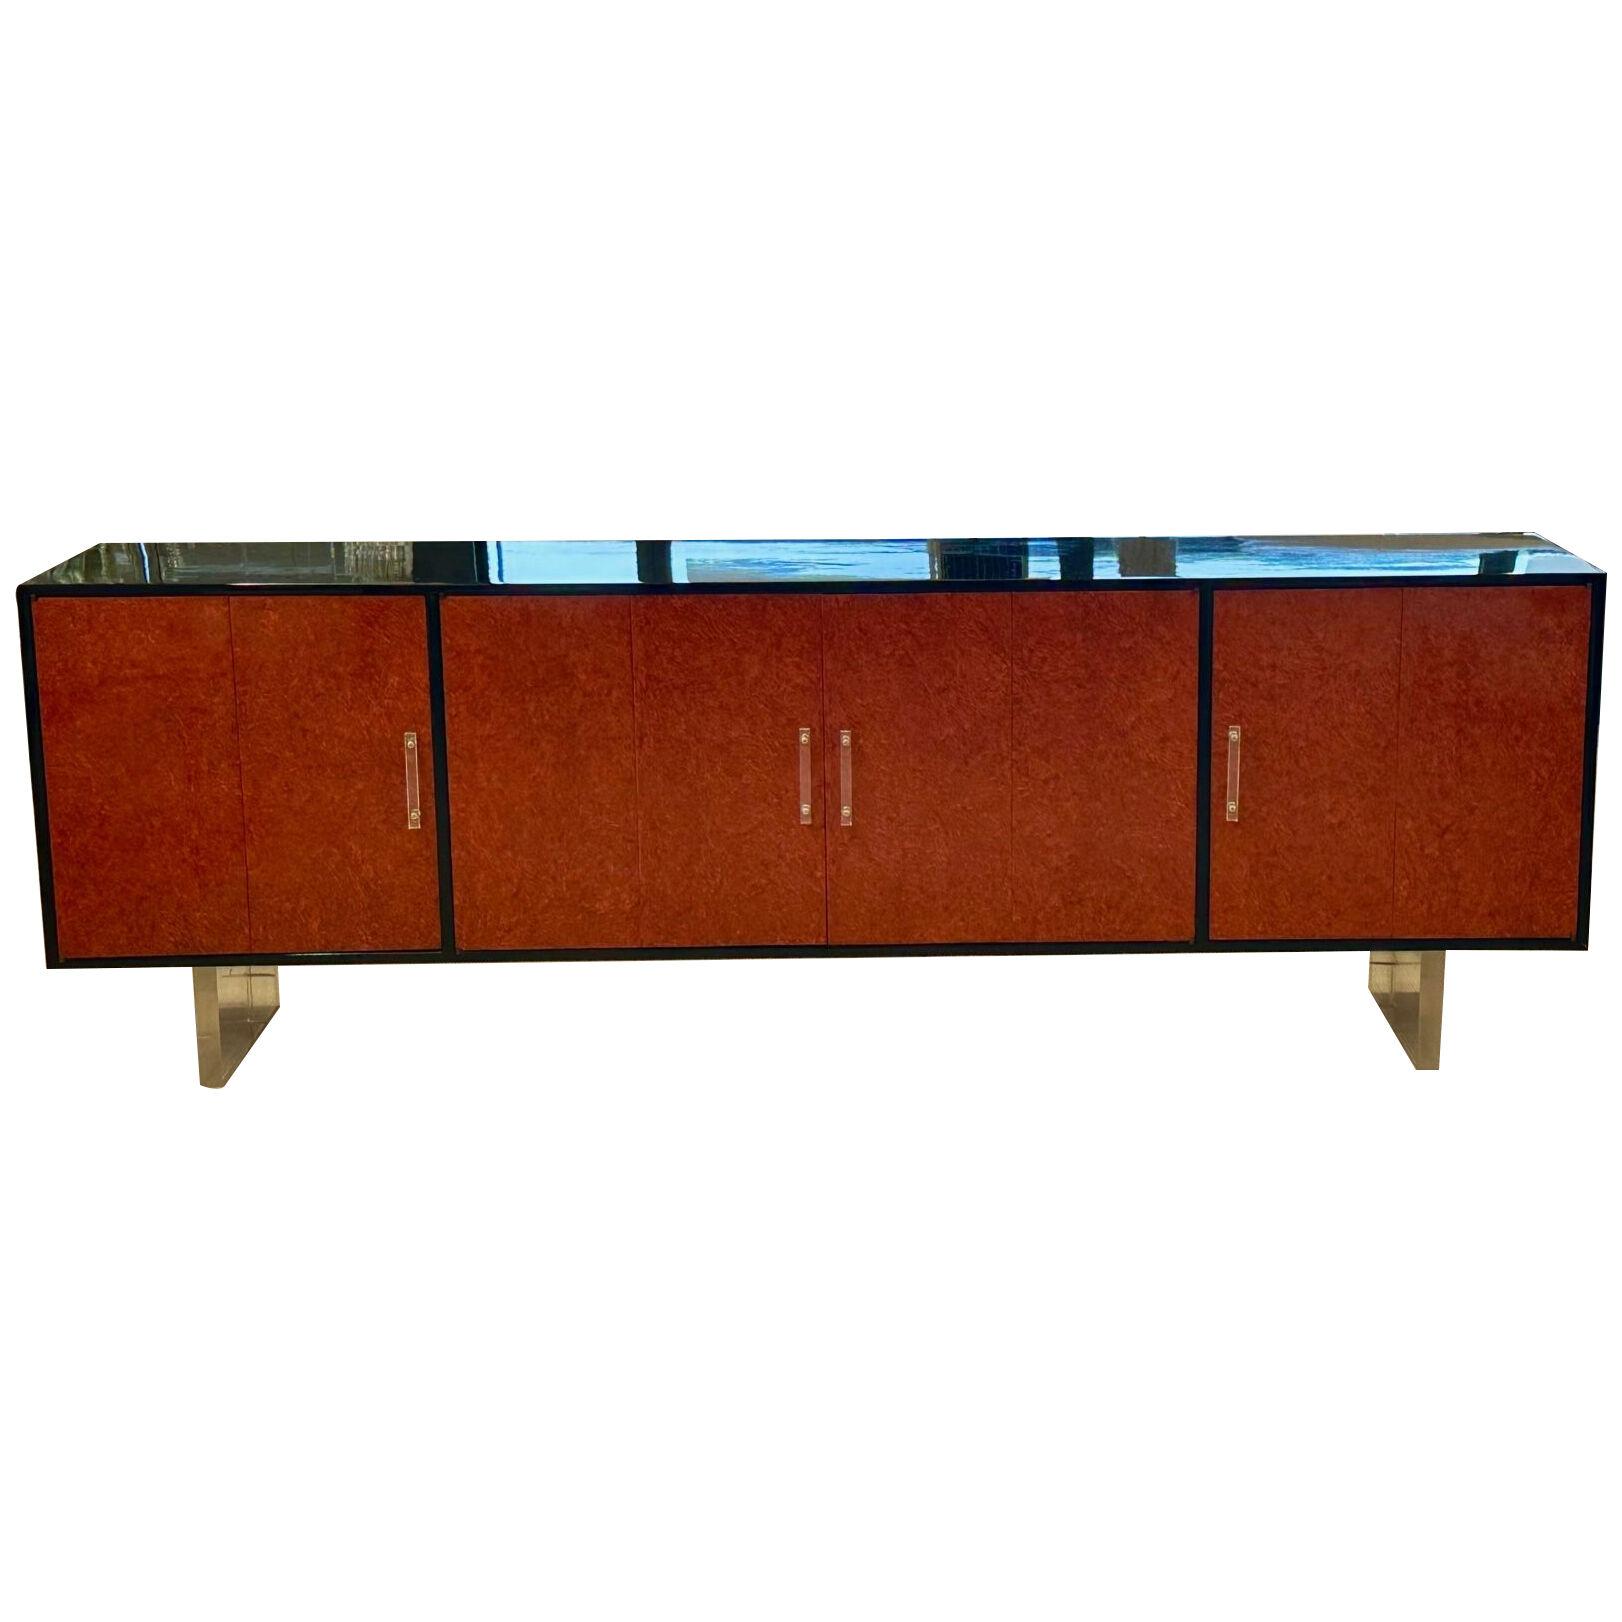 Mid-Century Modern Sideboard / Credenza, Kagan Style, Red Lacquered an Ebony